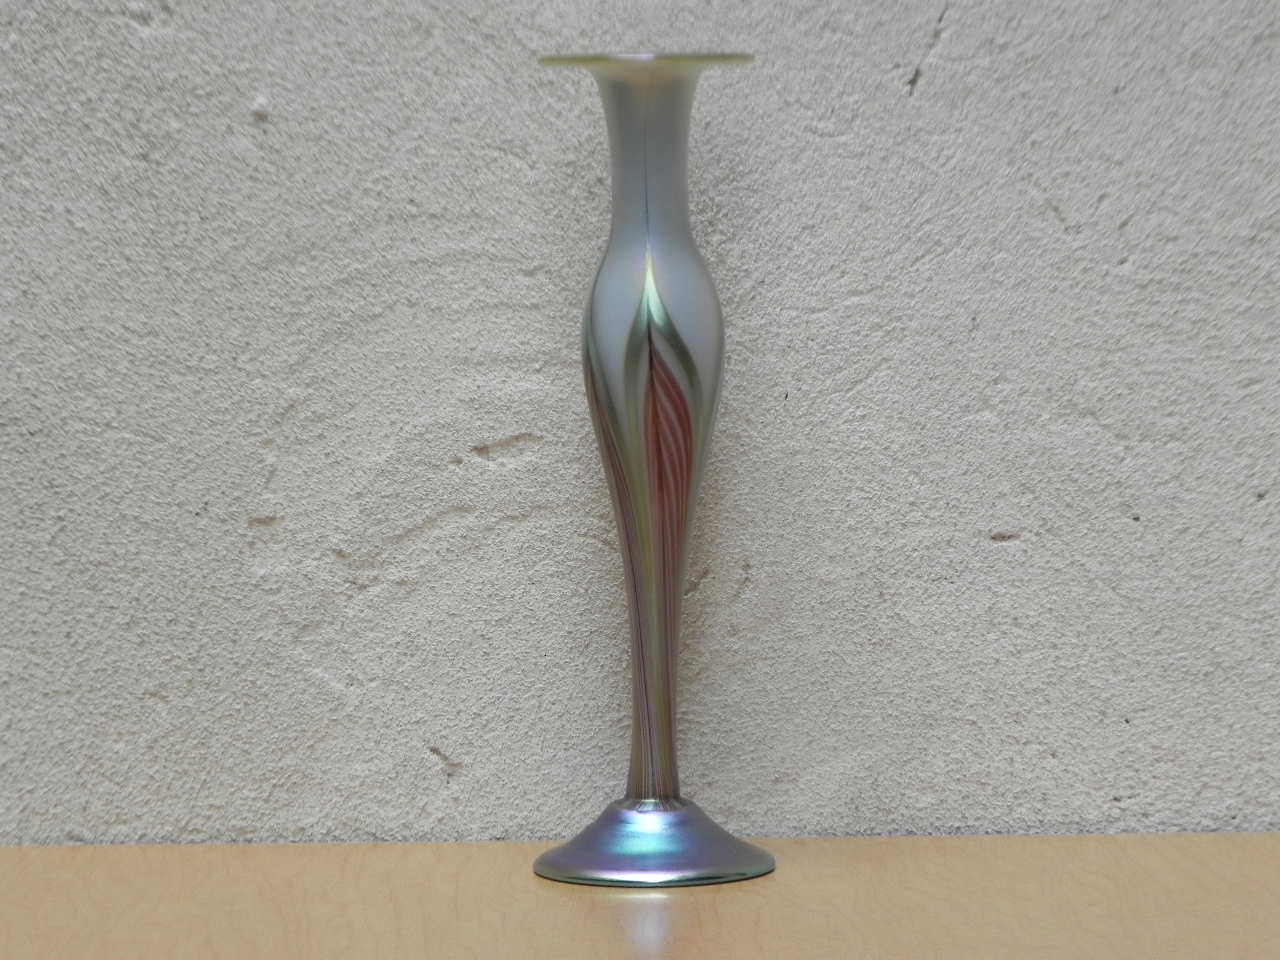 I Like Mike's Mid Century Modern Wall Decor & Art L.C. Tiffany Favrile Vase, Iridescent Pulled Feather Fluted Design, Circa 1900